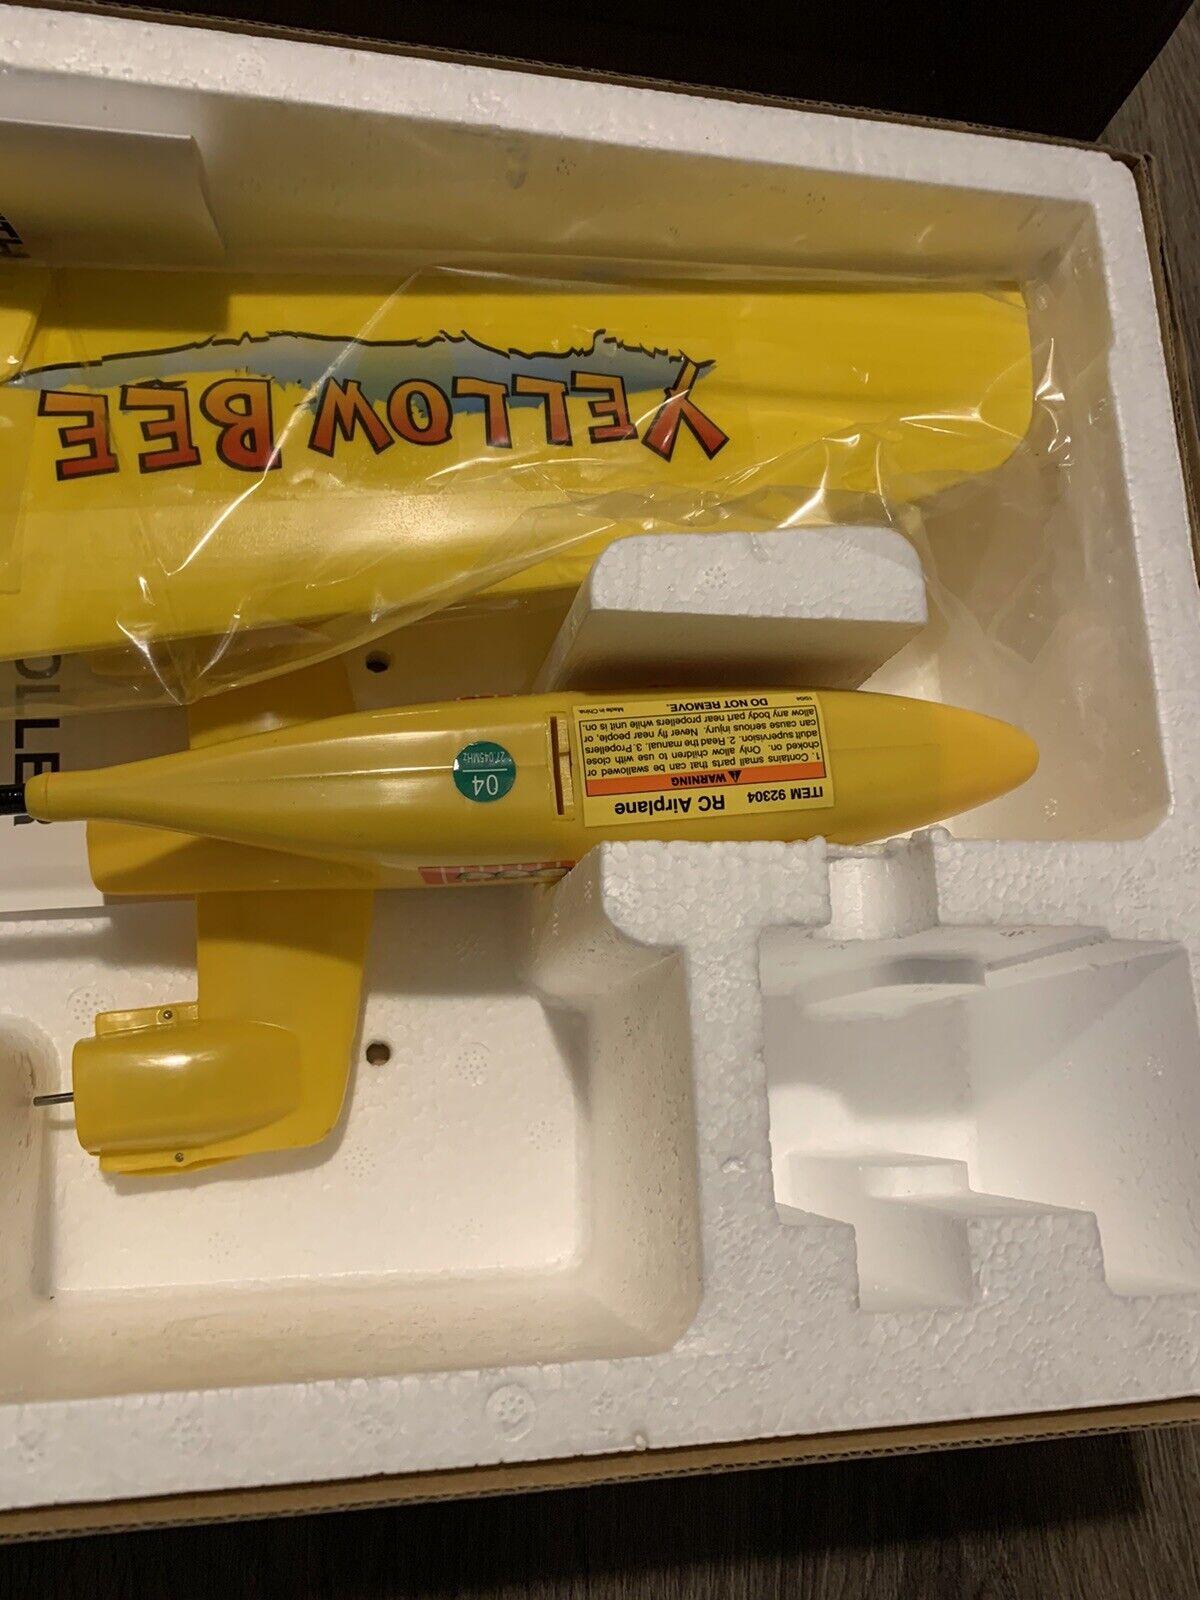 Yellow Remote Control Airplane: Maintenance and Cleaning Tips for Your Yellow Remote Control Airplane.